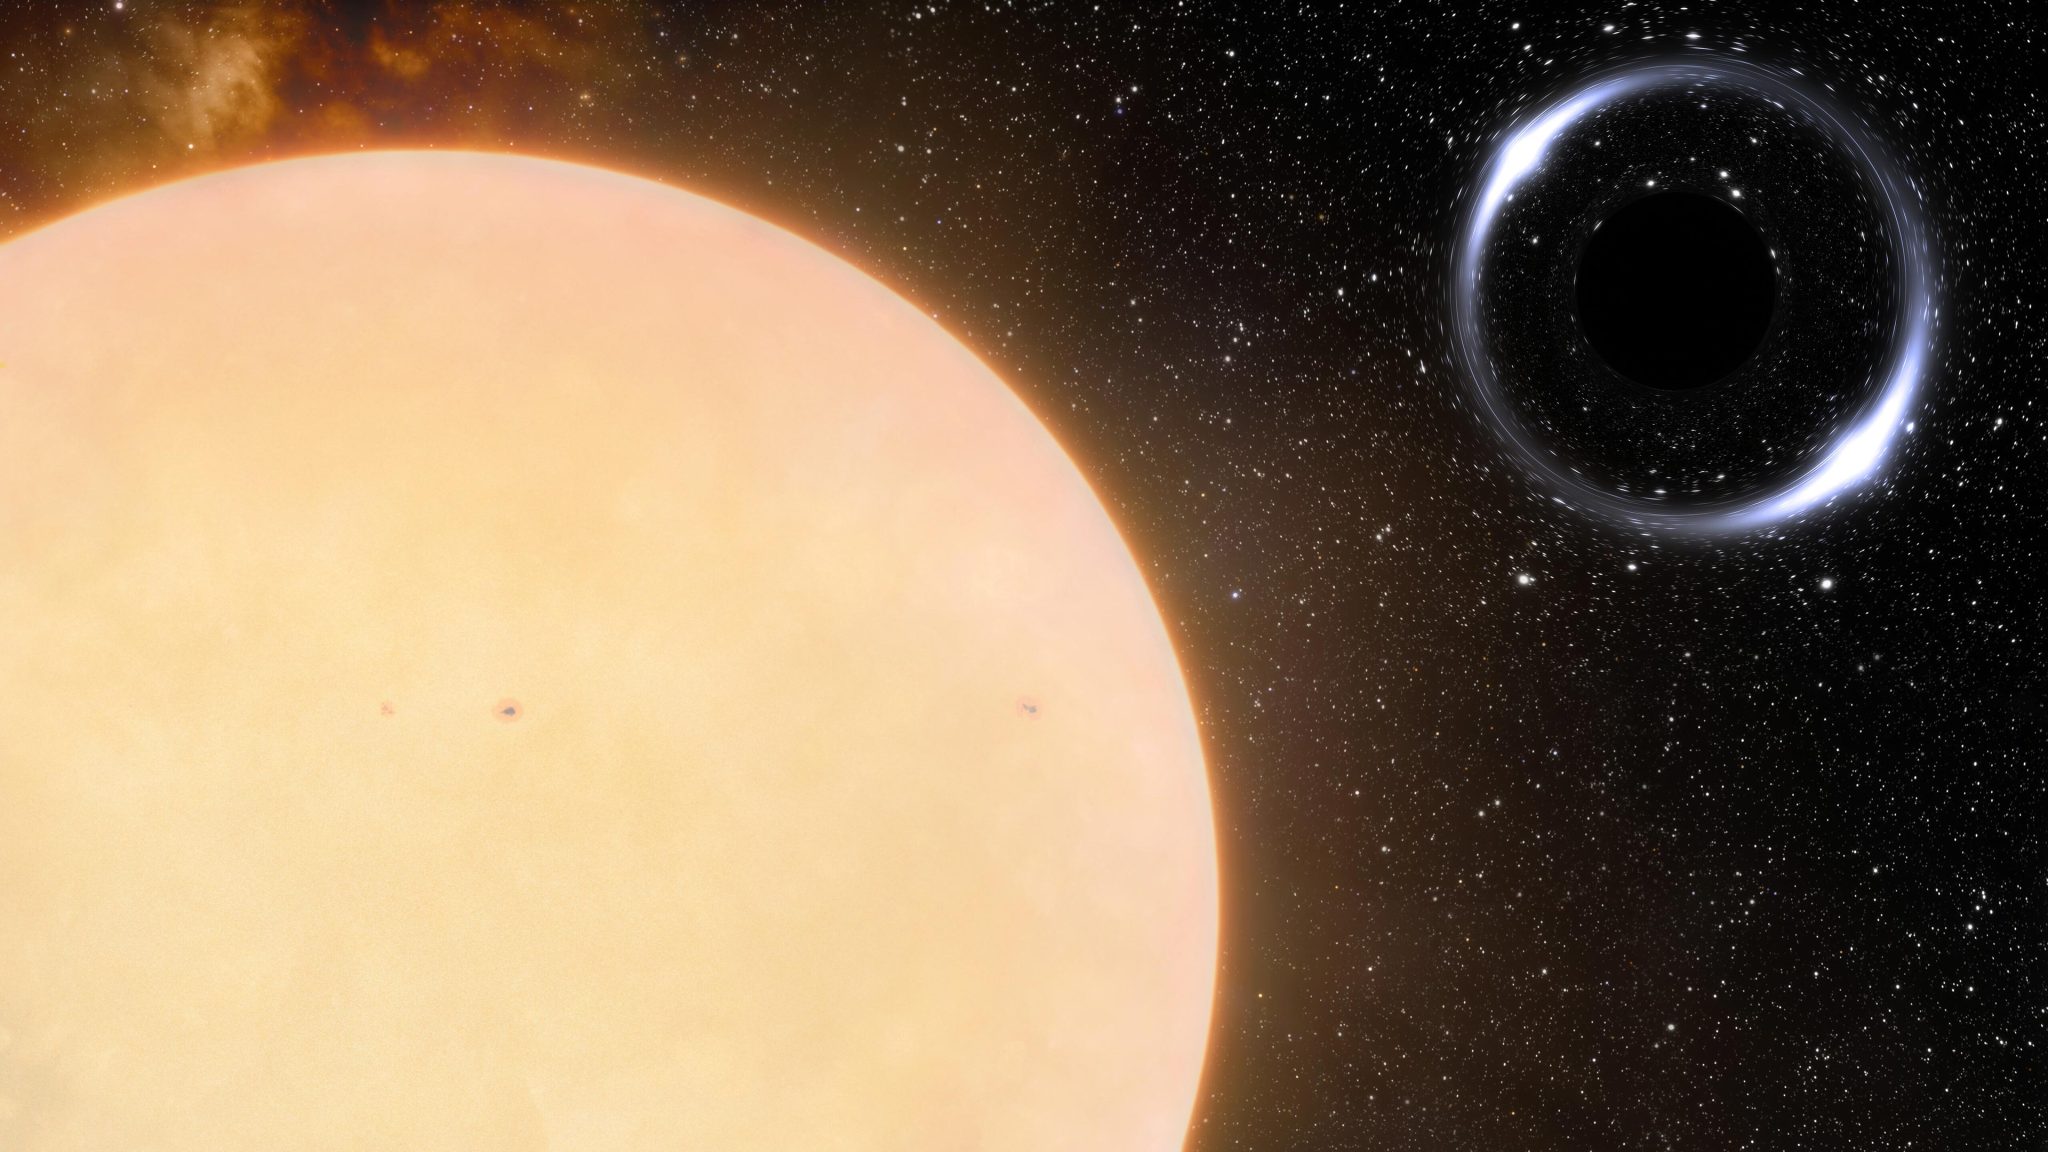 Artist's impression of the closest black hole to Earth and its companion Sun-like star